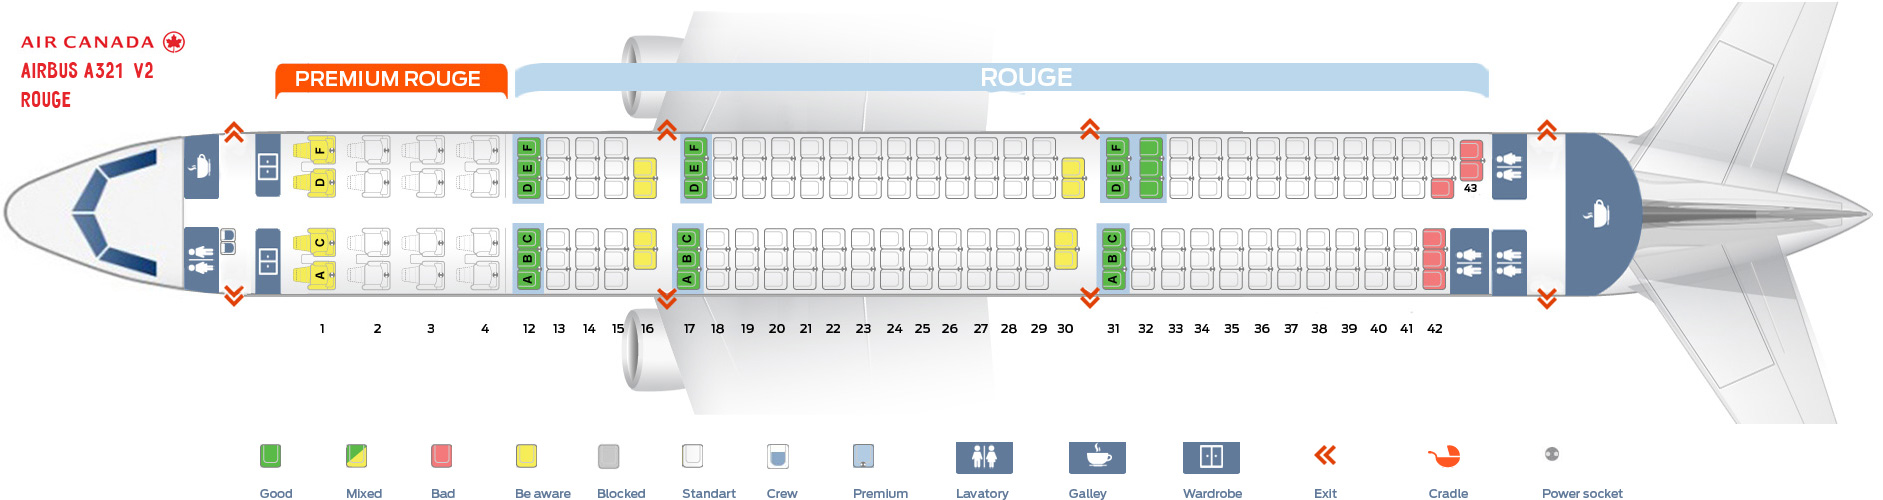 Seat_map_Air_Canada_Airbus_A321_v2_rouge